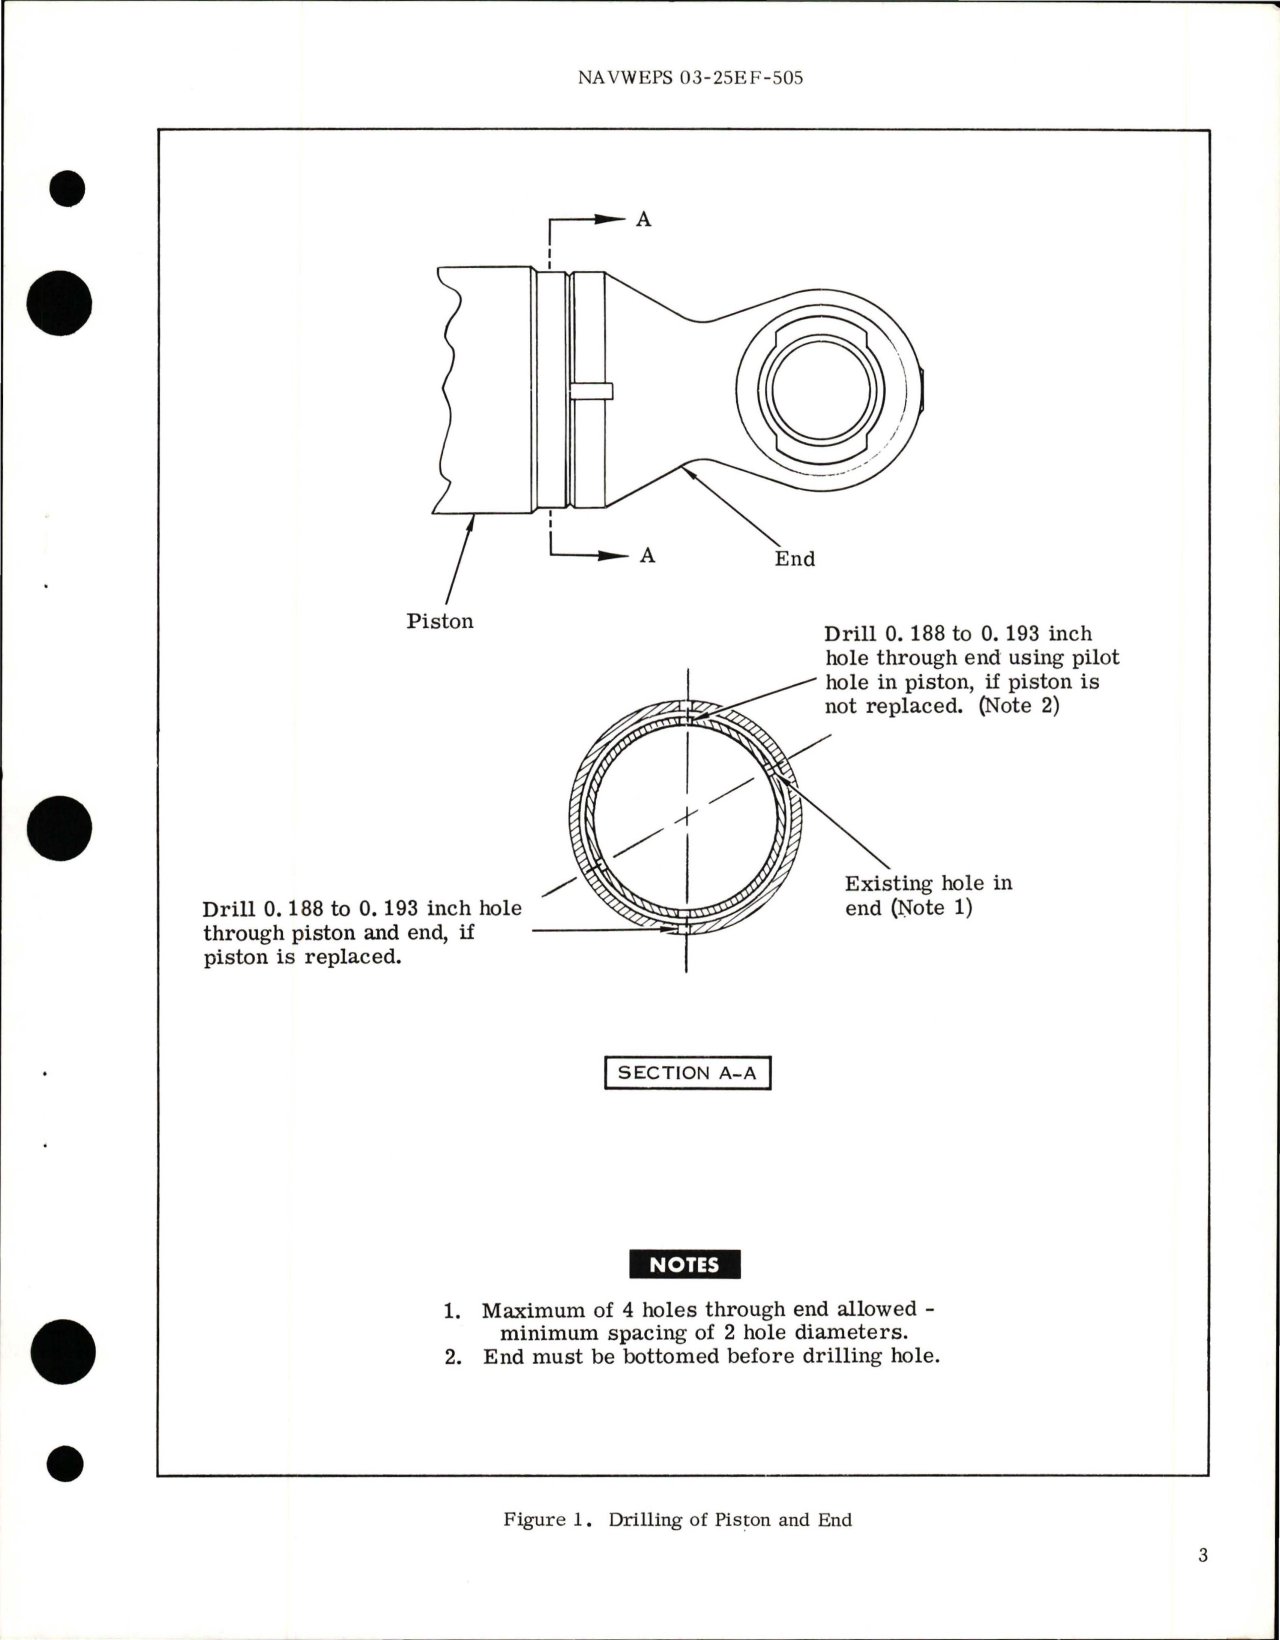 Sample page 5 from AirCorps Library document: Overhaul Instructions with Parts Breakdown for Main Gear Pneudraulic Shock Strut Assembly